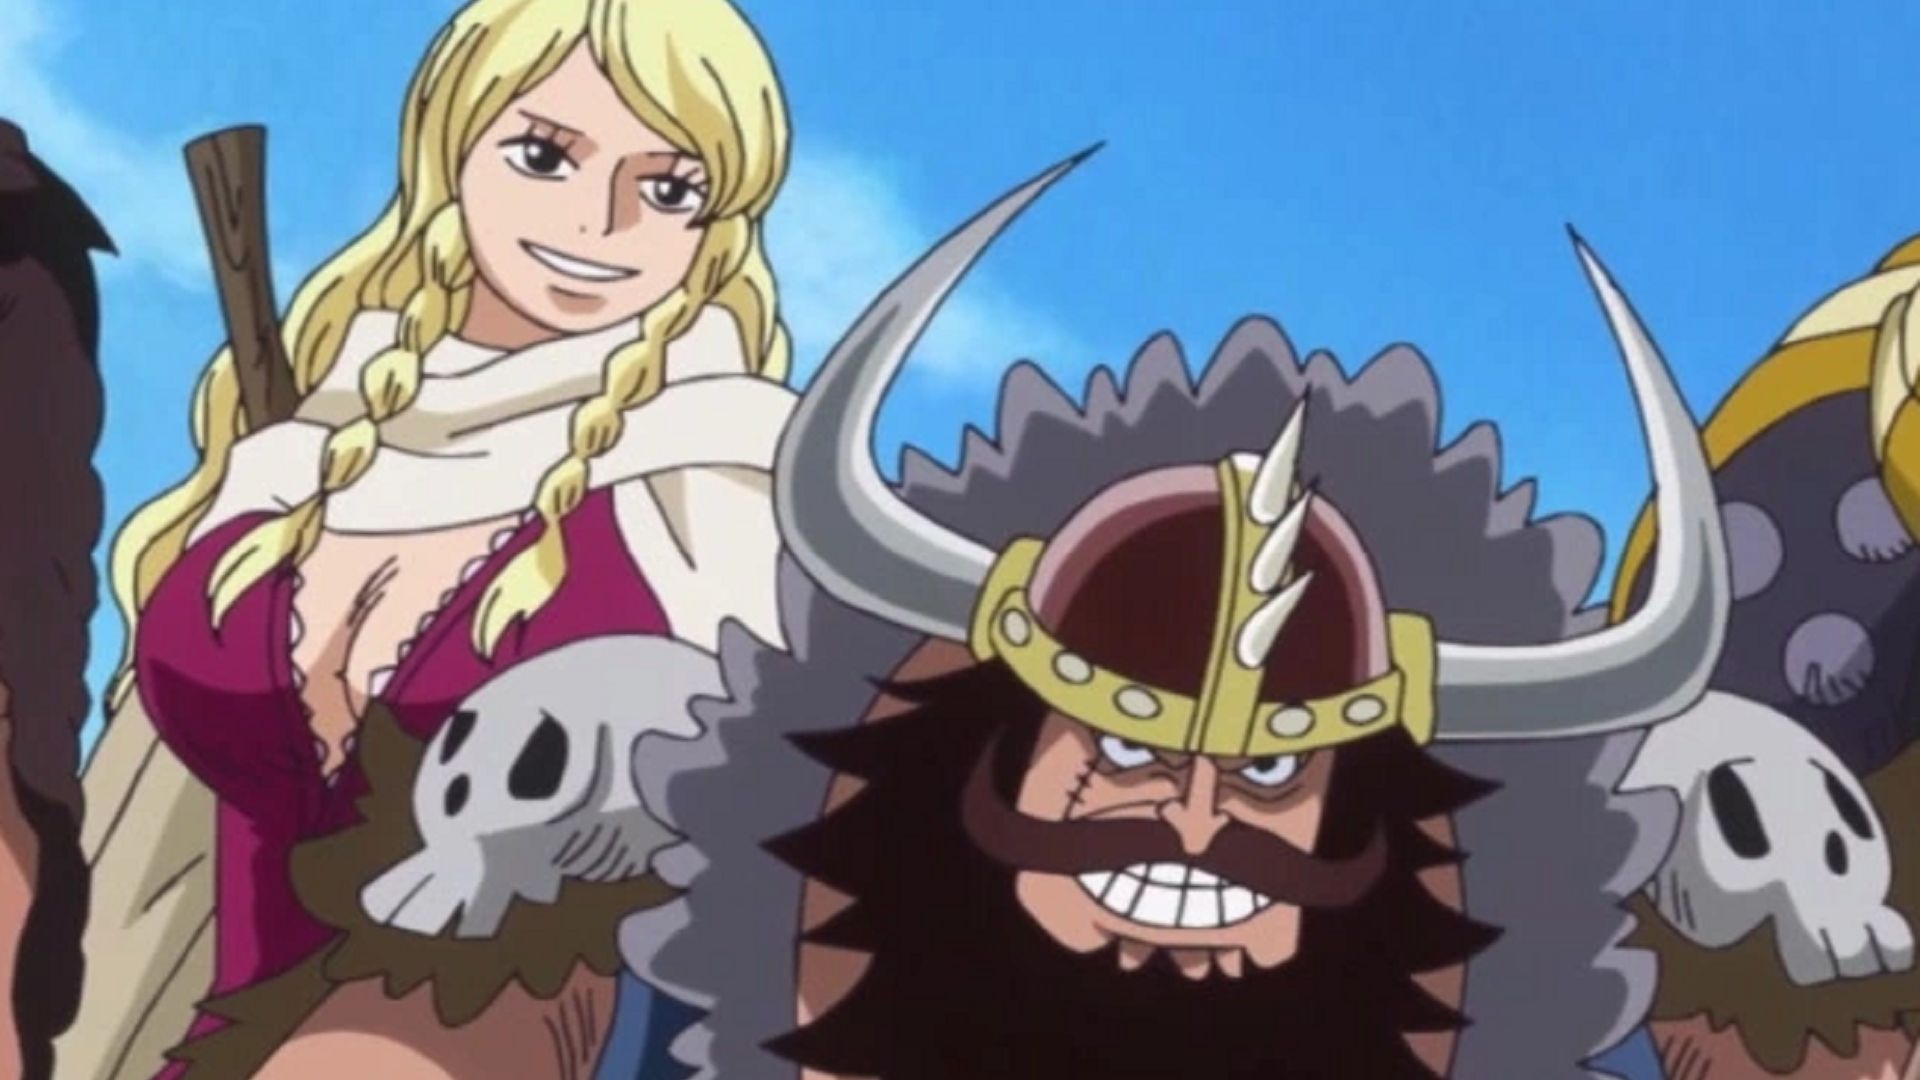 Gerd and Stansen as seen in the One Piece anime (Image via Toei Animation)